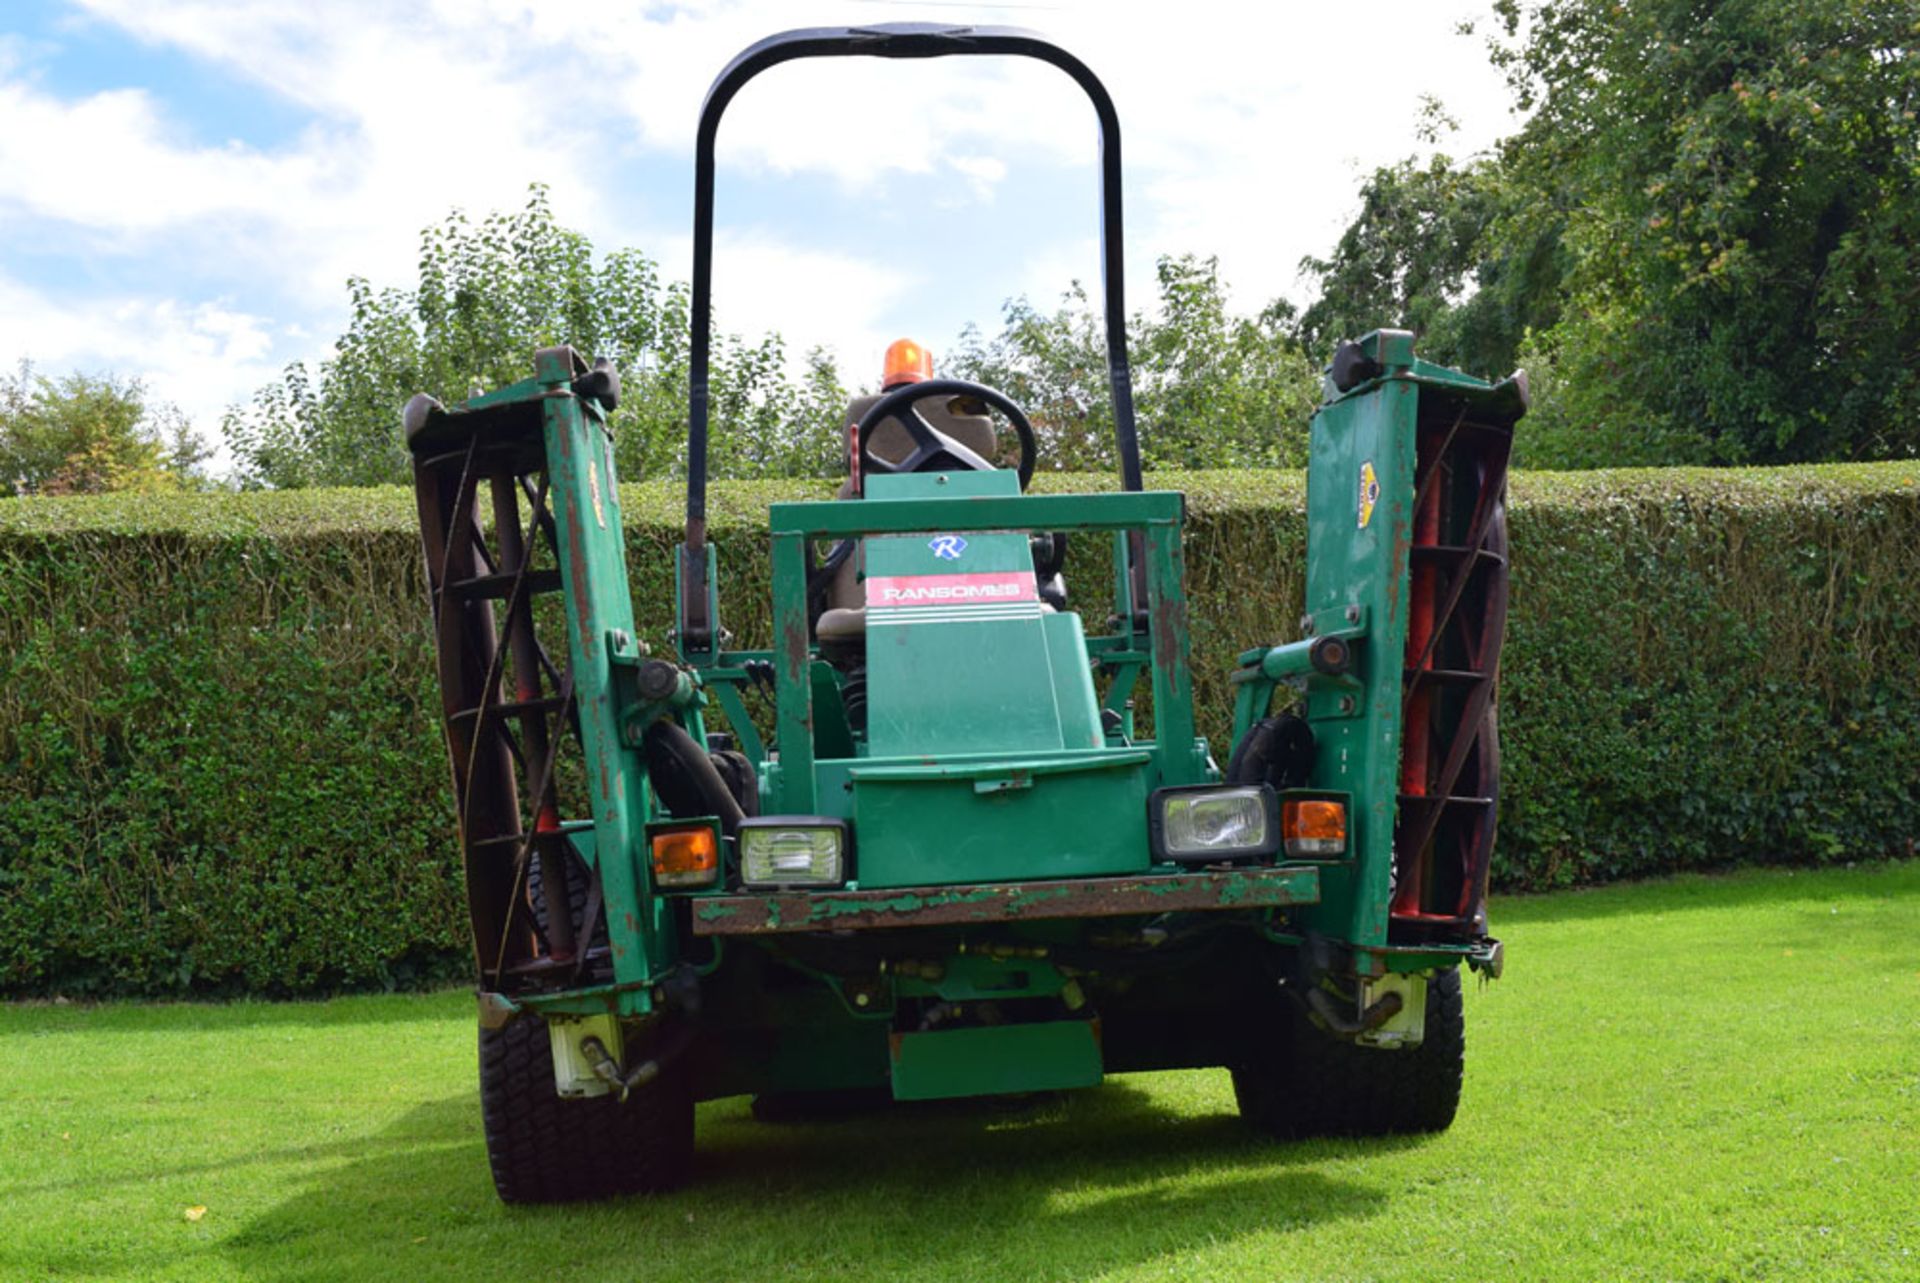 2003 Ransomes Parkway 2250 Plus Ride On Cylinder Mower - Image 3 of 8